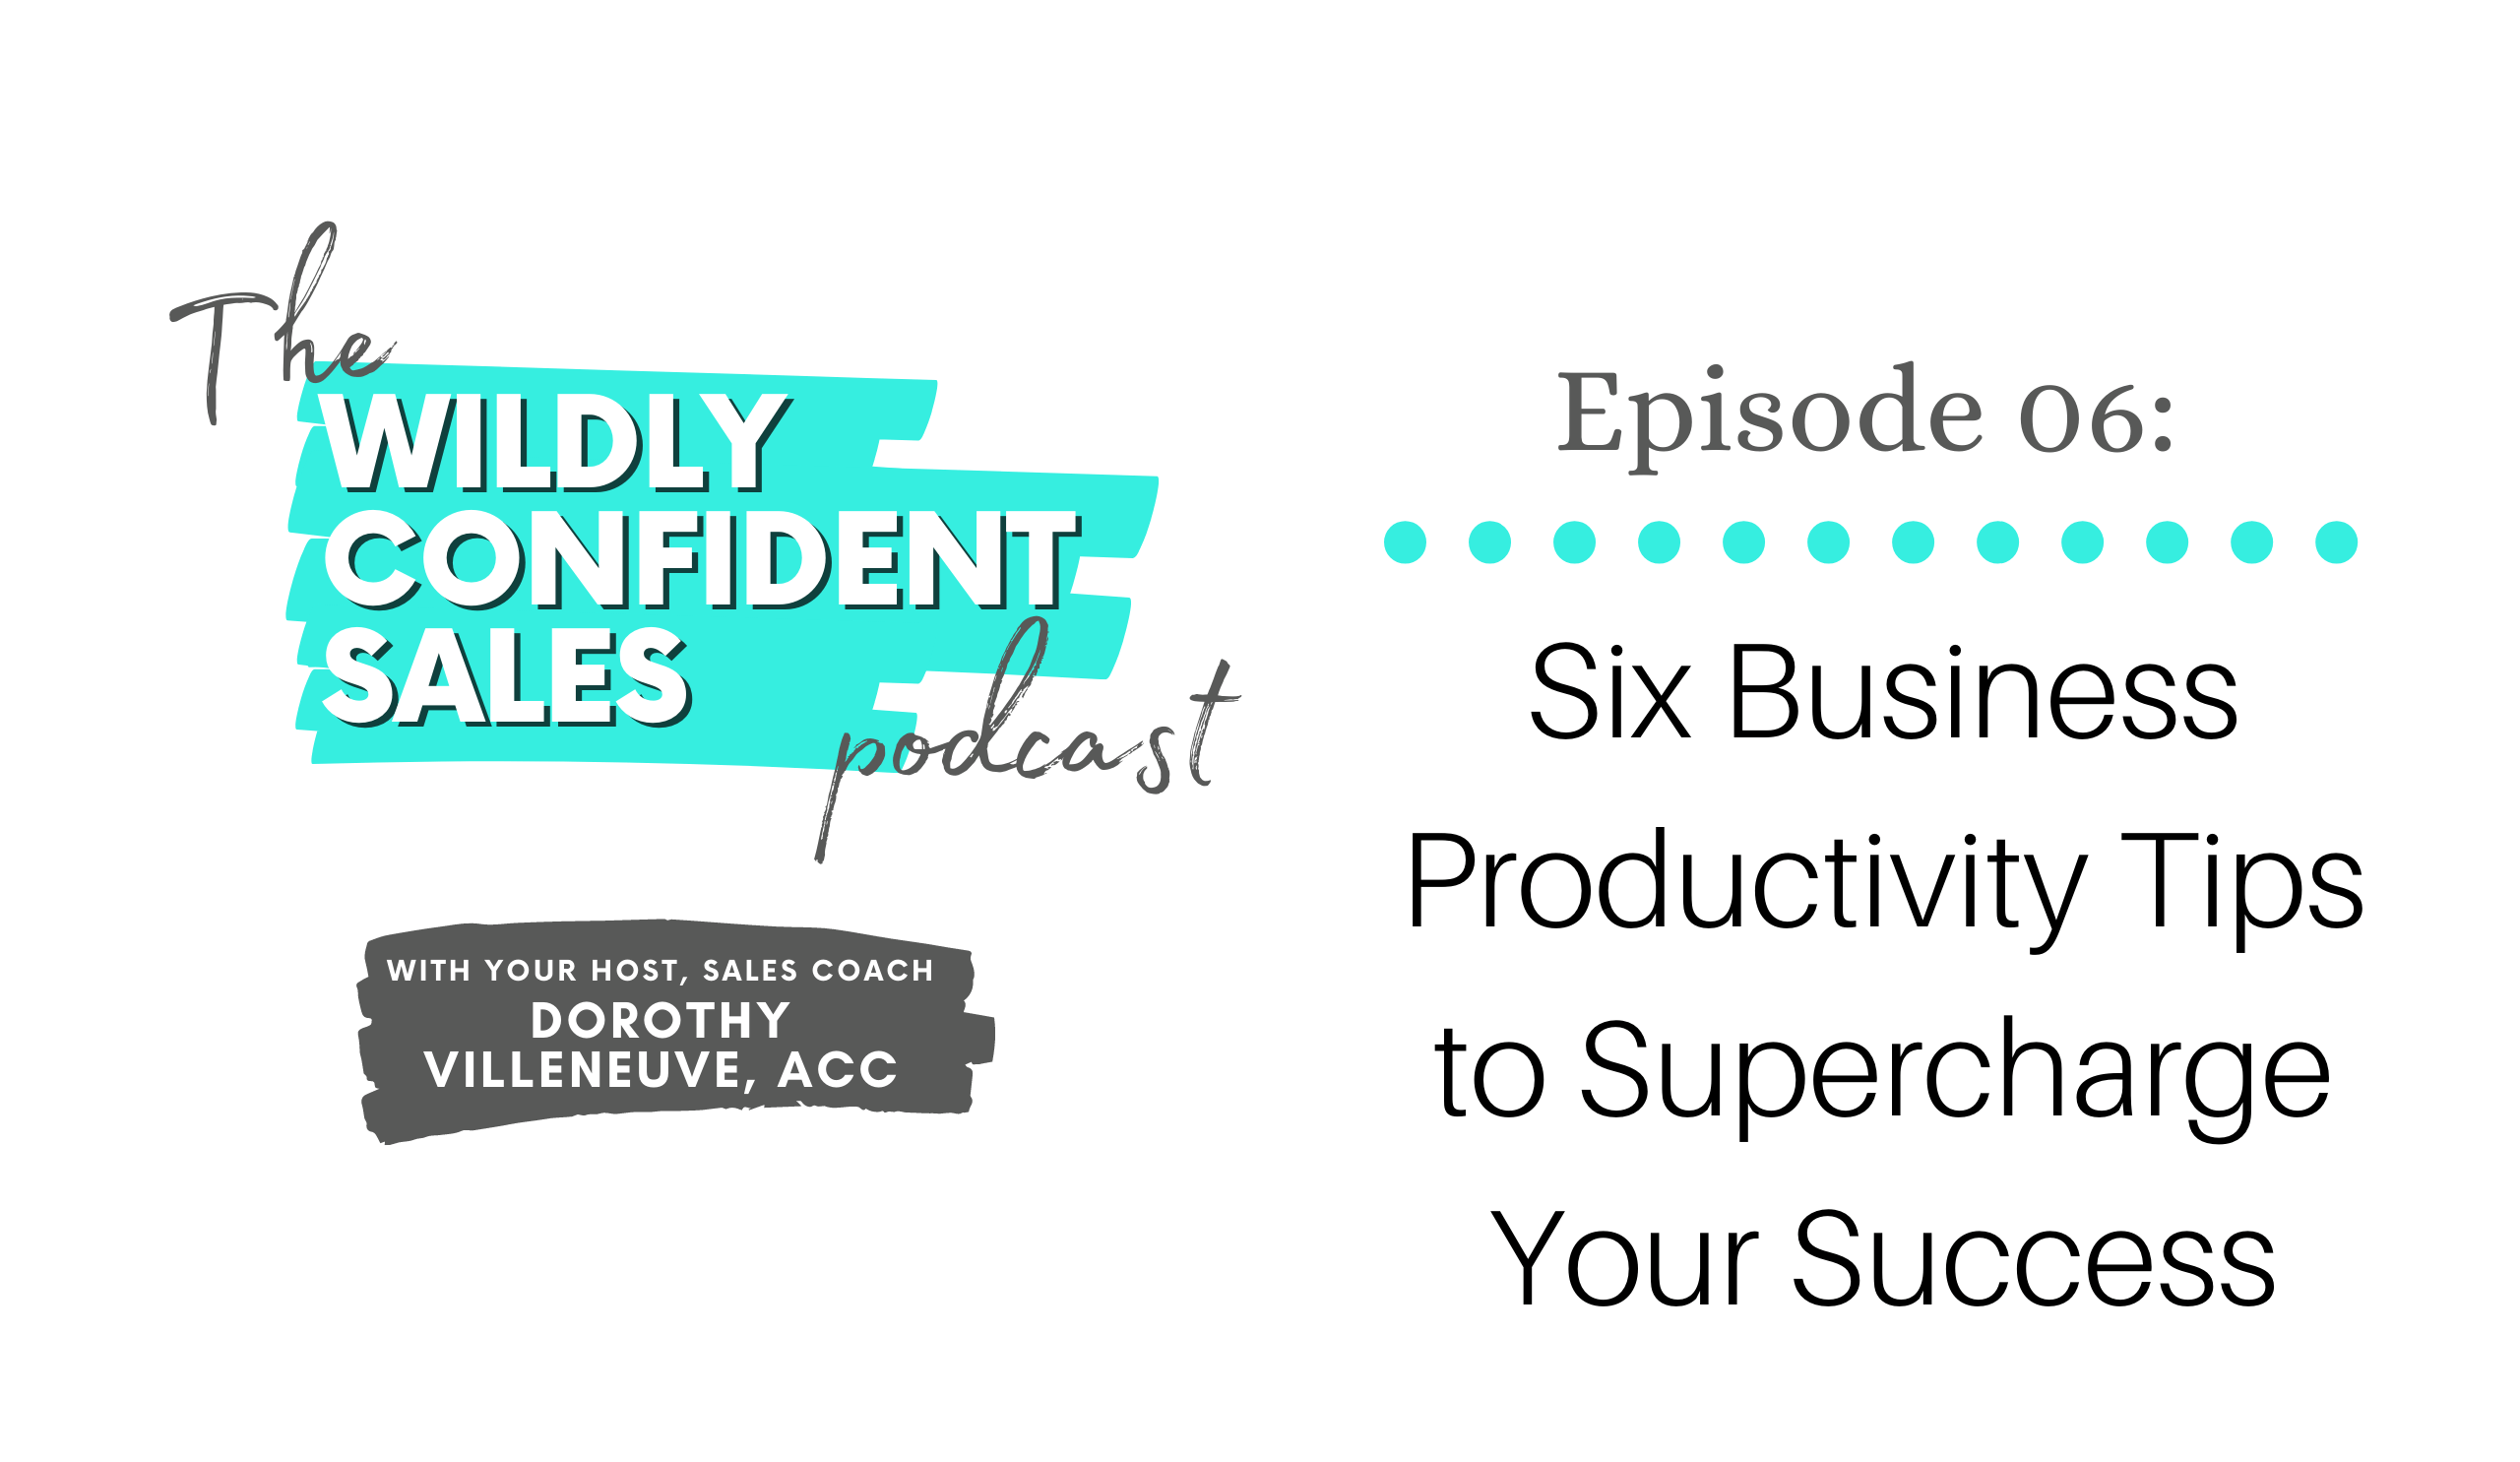 Six Business Productivity Tips to Supercharge Your Success